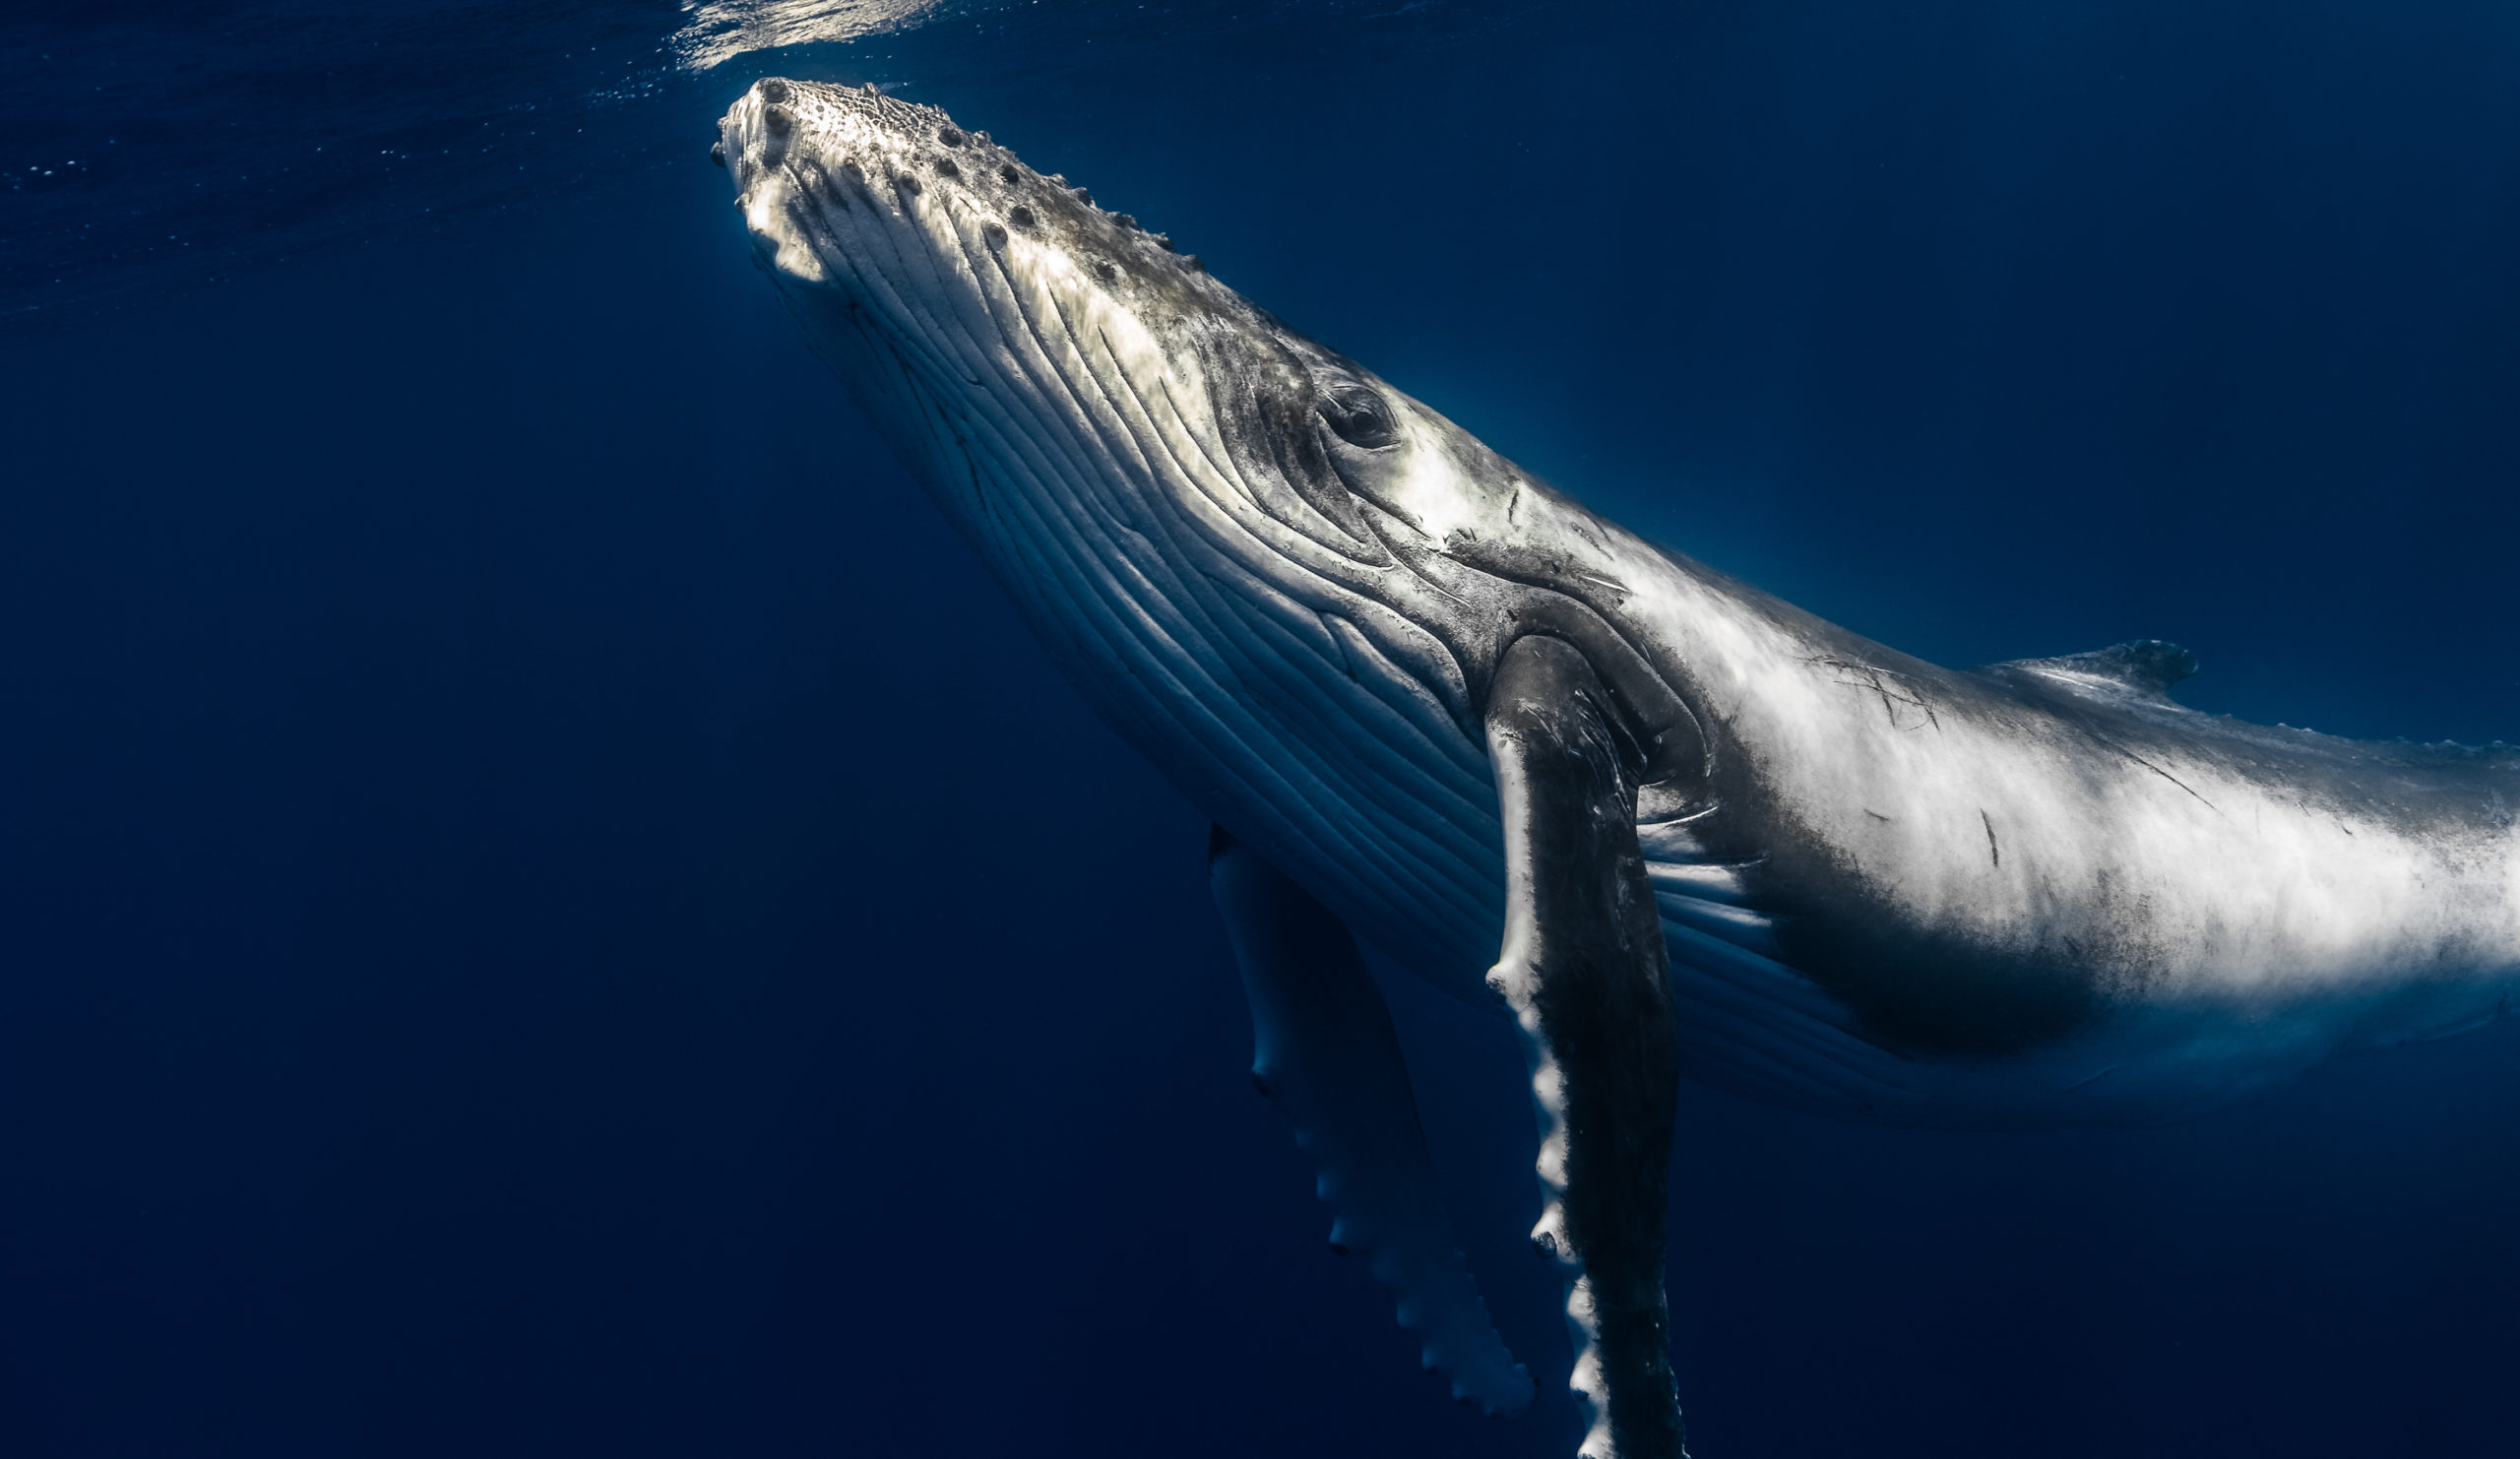 Southern humpback whale looking up in dark blue water.